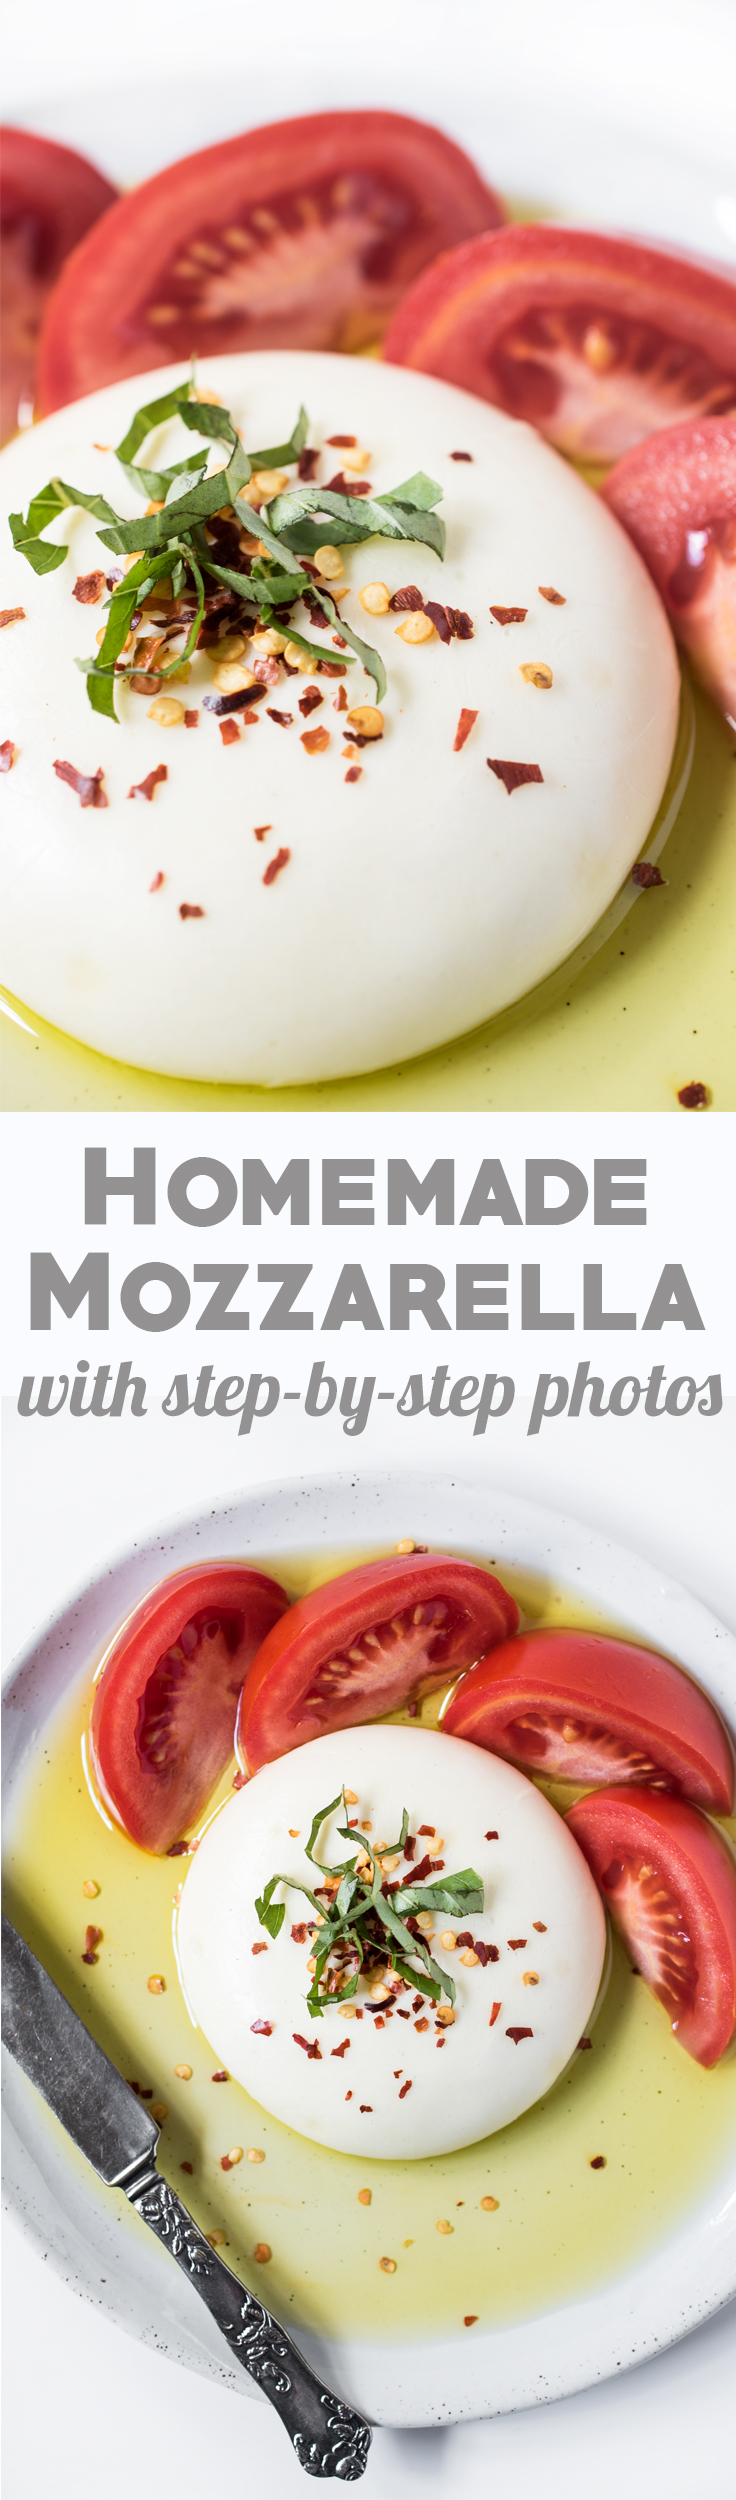 Make Homemade Mozzarella in just 30 minutes! Step-by-step photos included!